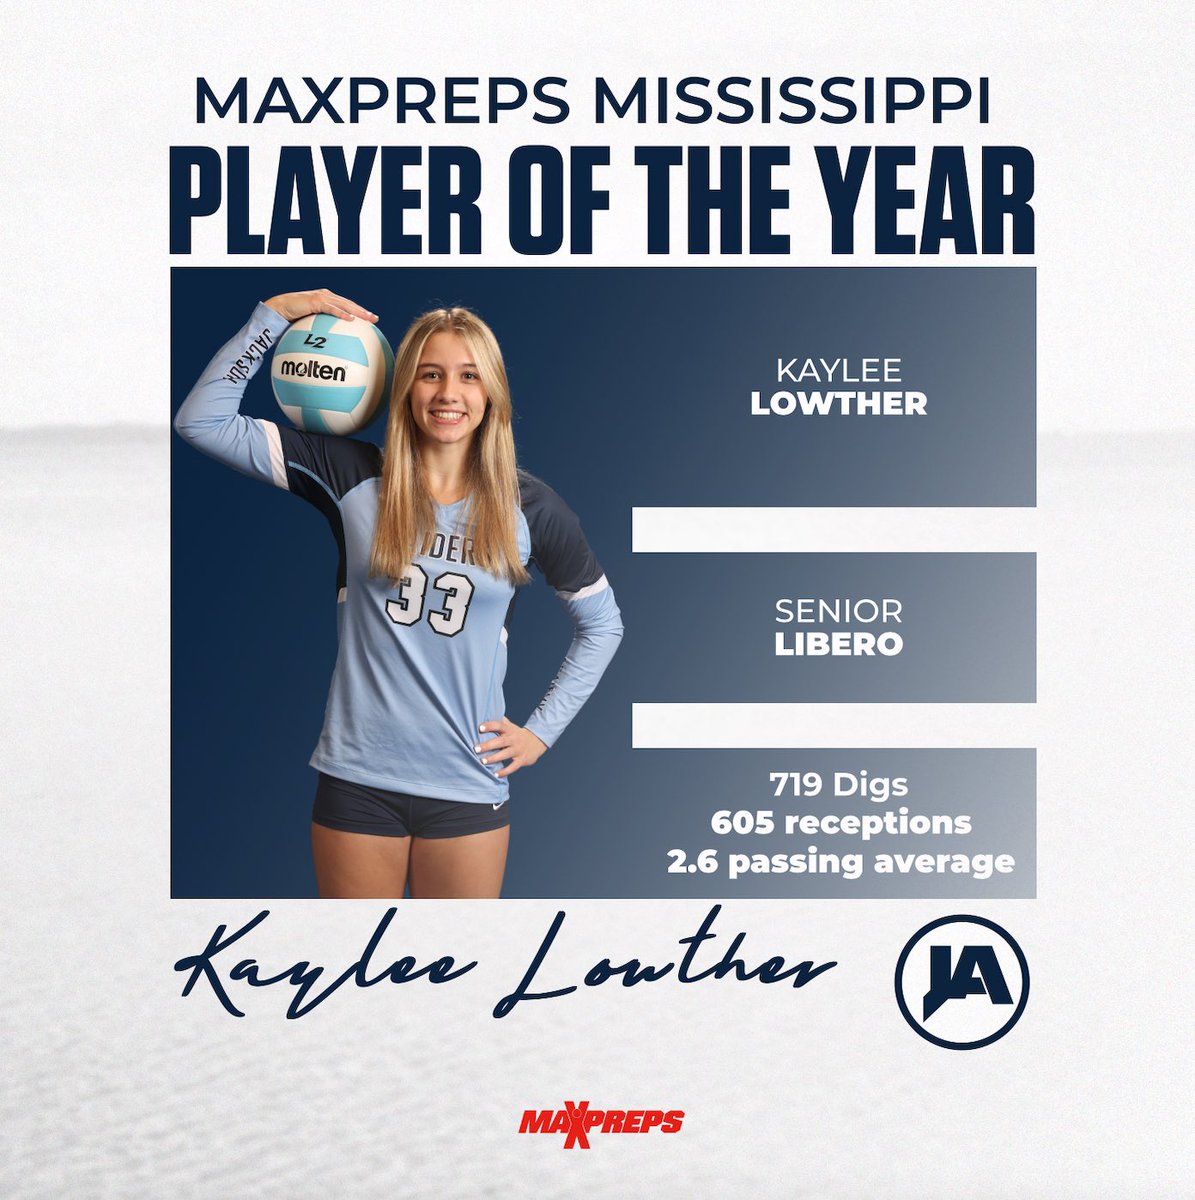 MAXPREPS MISSISSIPPI PLAYER OF THE YEAR!  

Congratulations to senior Libero, Kaylee Lowther, for being named by MaxPreps as Mississippi Player of the Year!!

We are so proud of you Kaylee and how you represent JA and our program! 

#WeAreJA #MakeItMatter